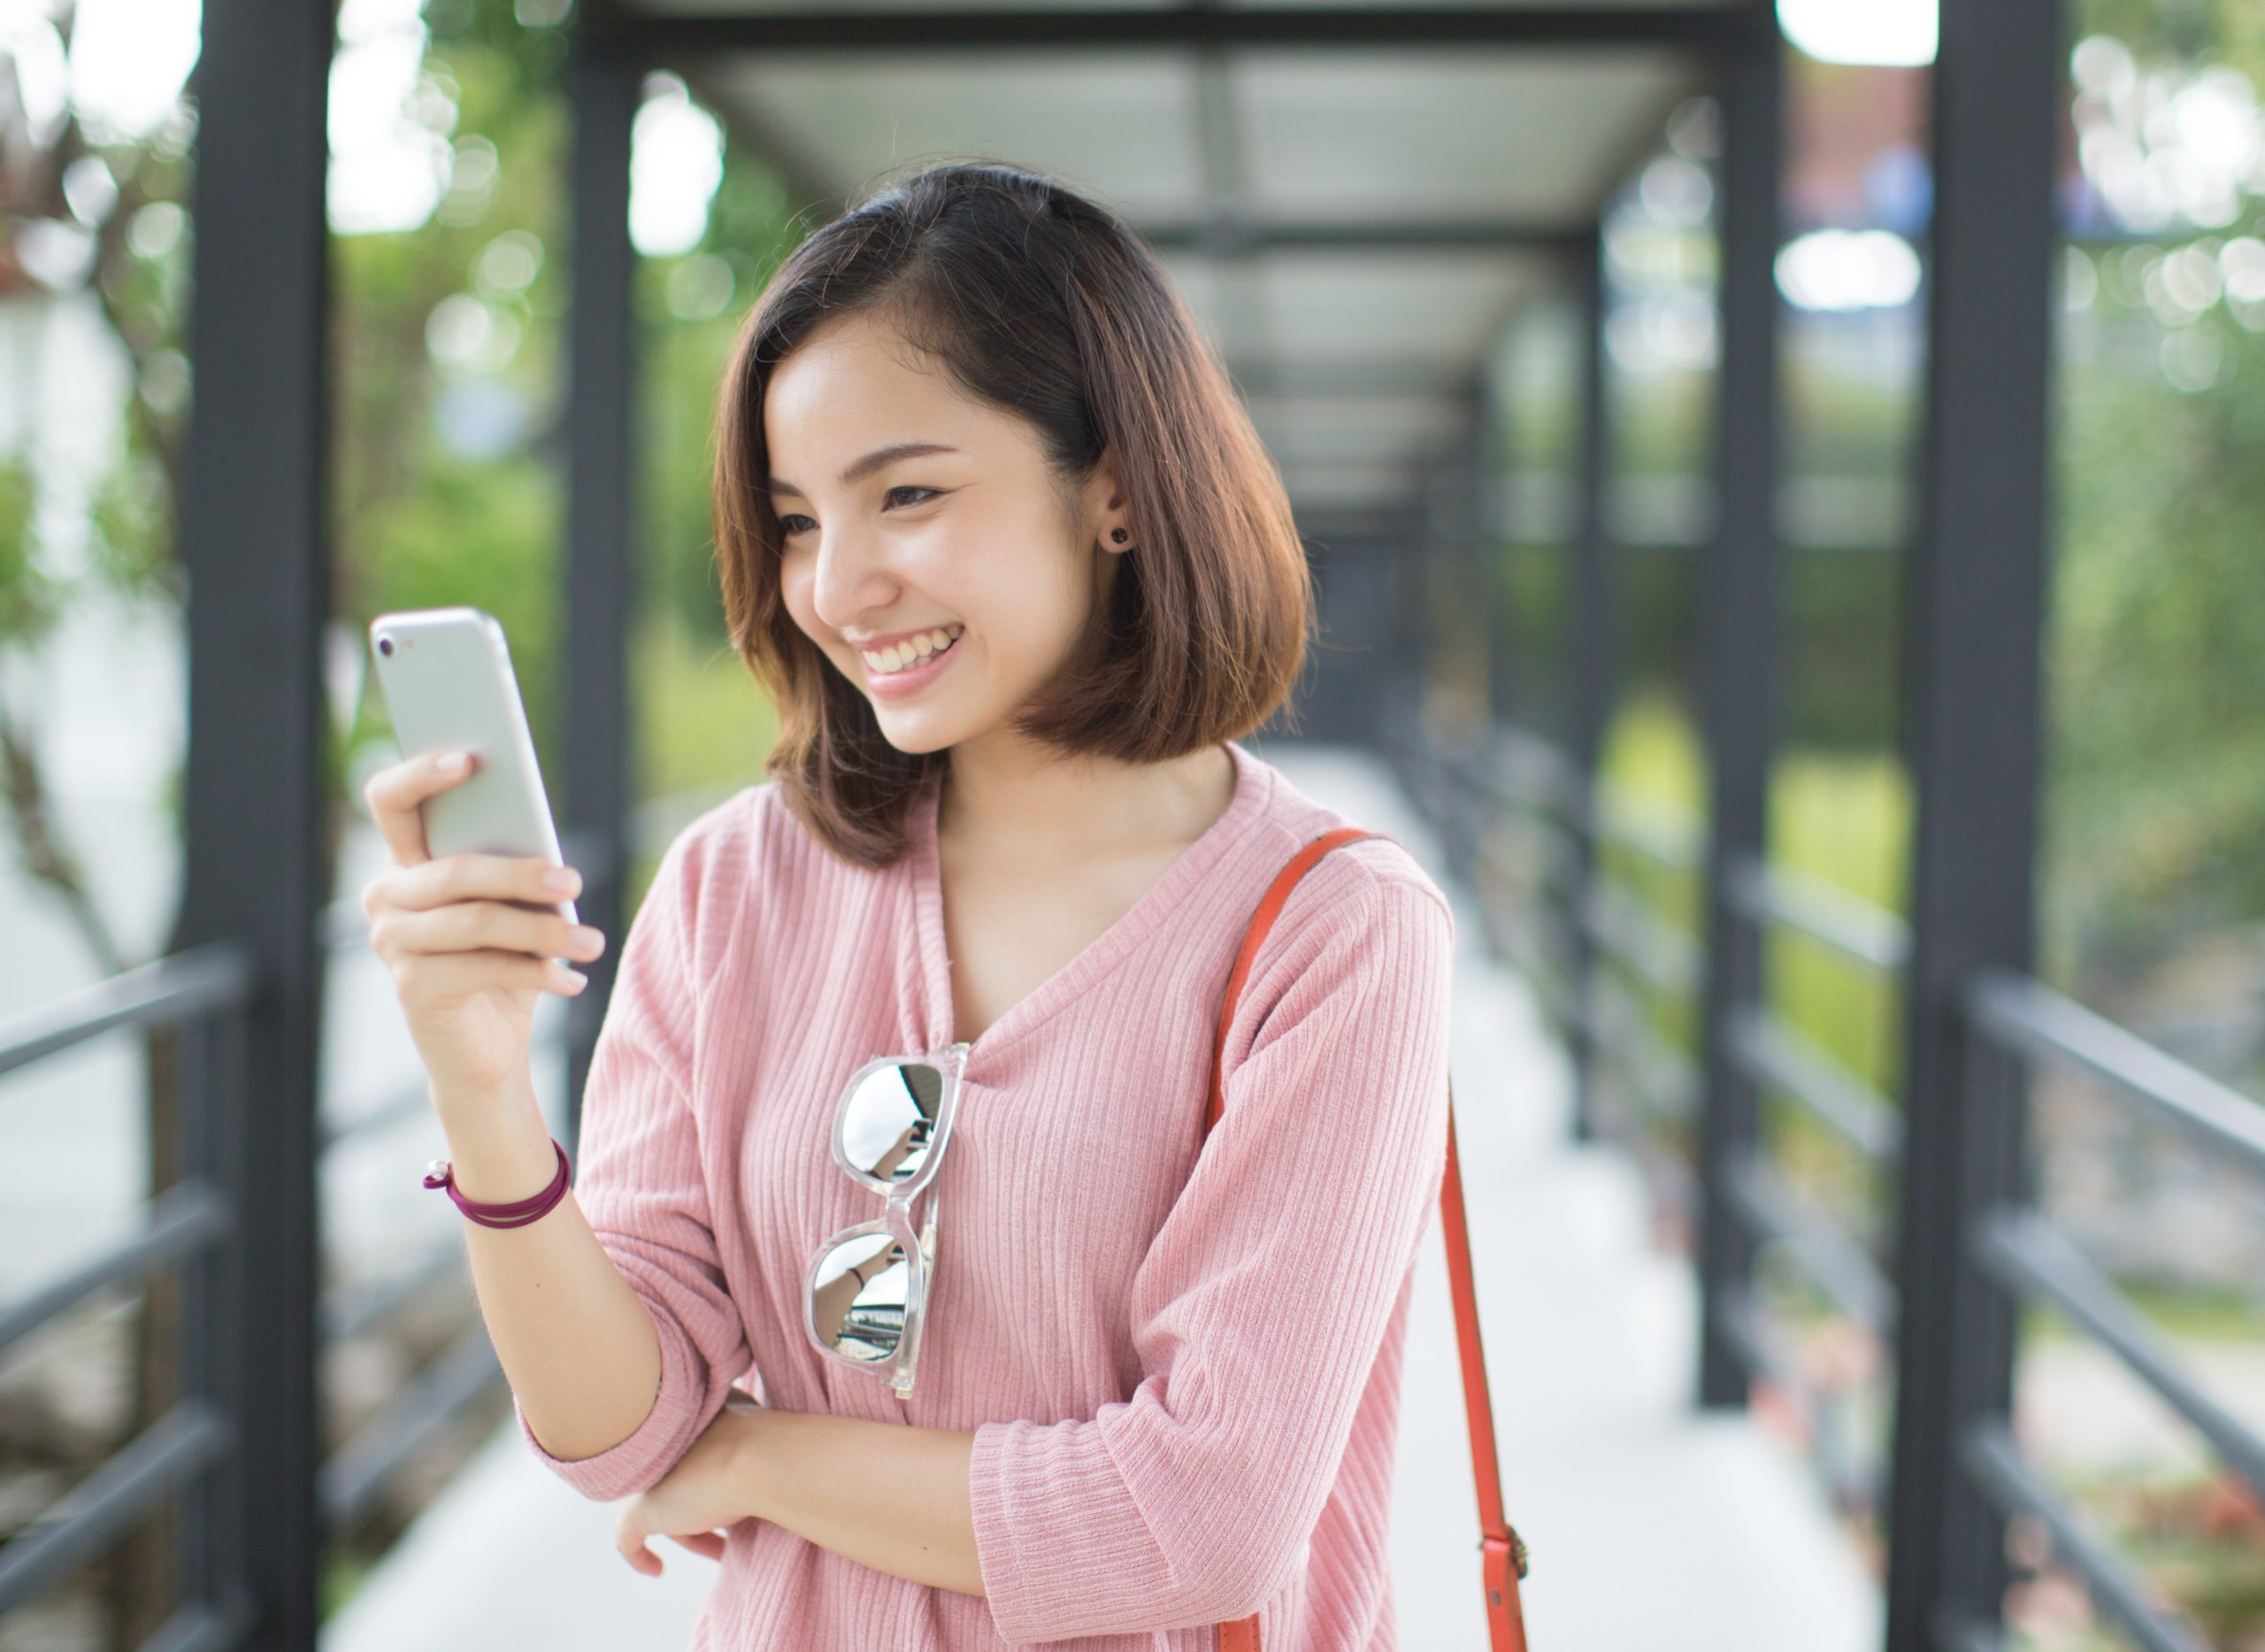 Filipinos Top The Longest Hours Spent on Their Mobile Phones